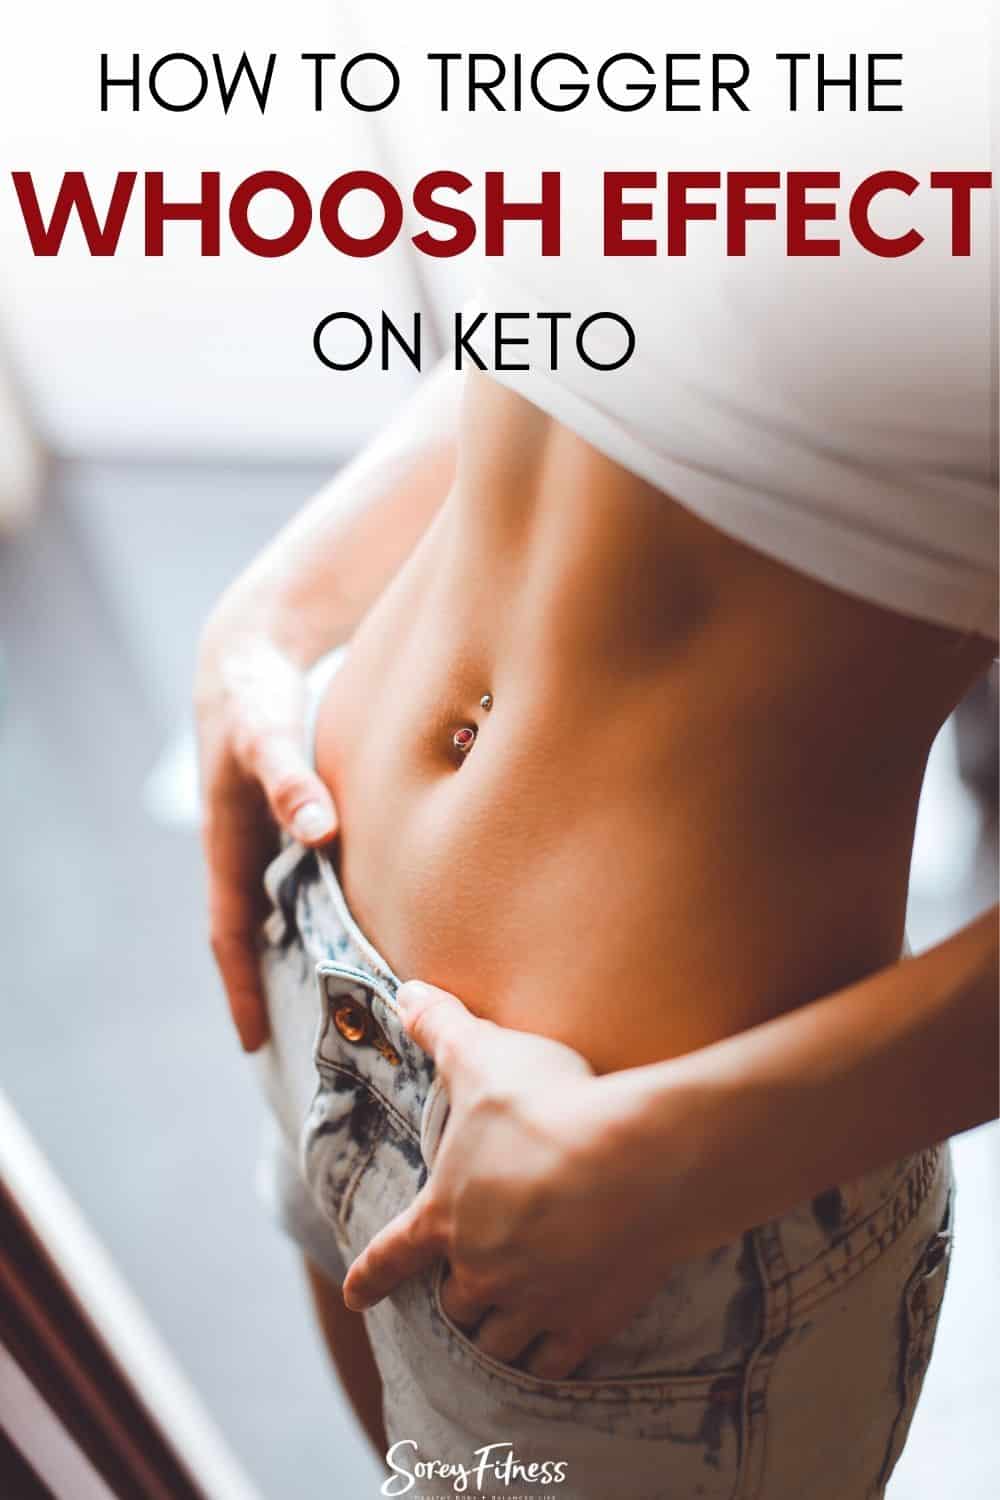 woman's abs with the text "how to trigger the whoosh effect on keto"